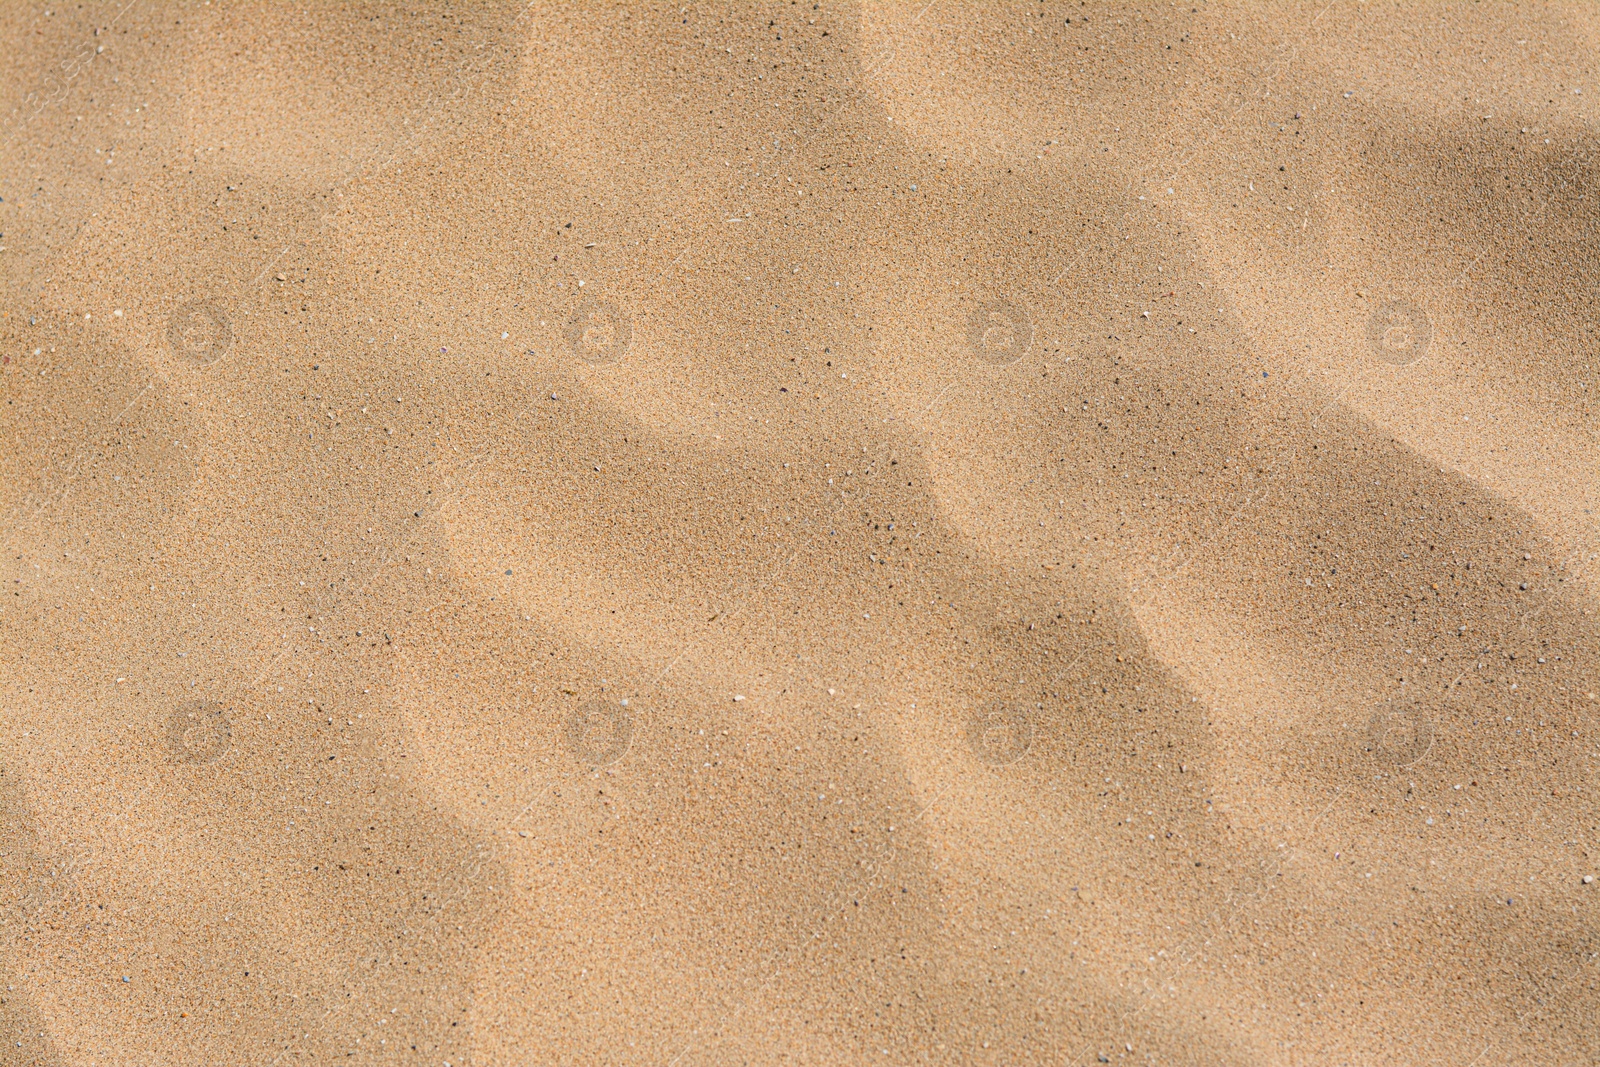 Photo of Texture of sandy beach as background, top view